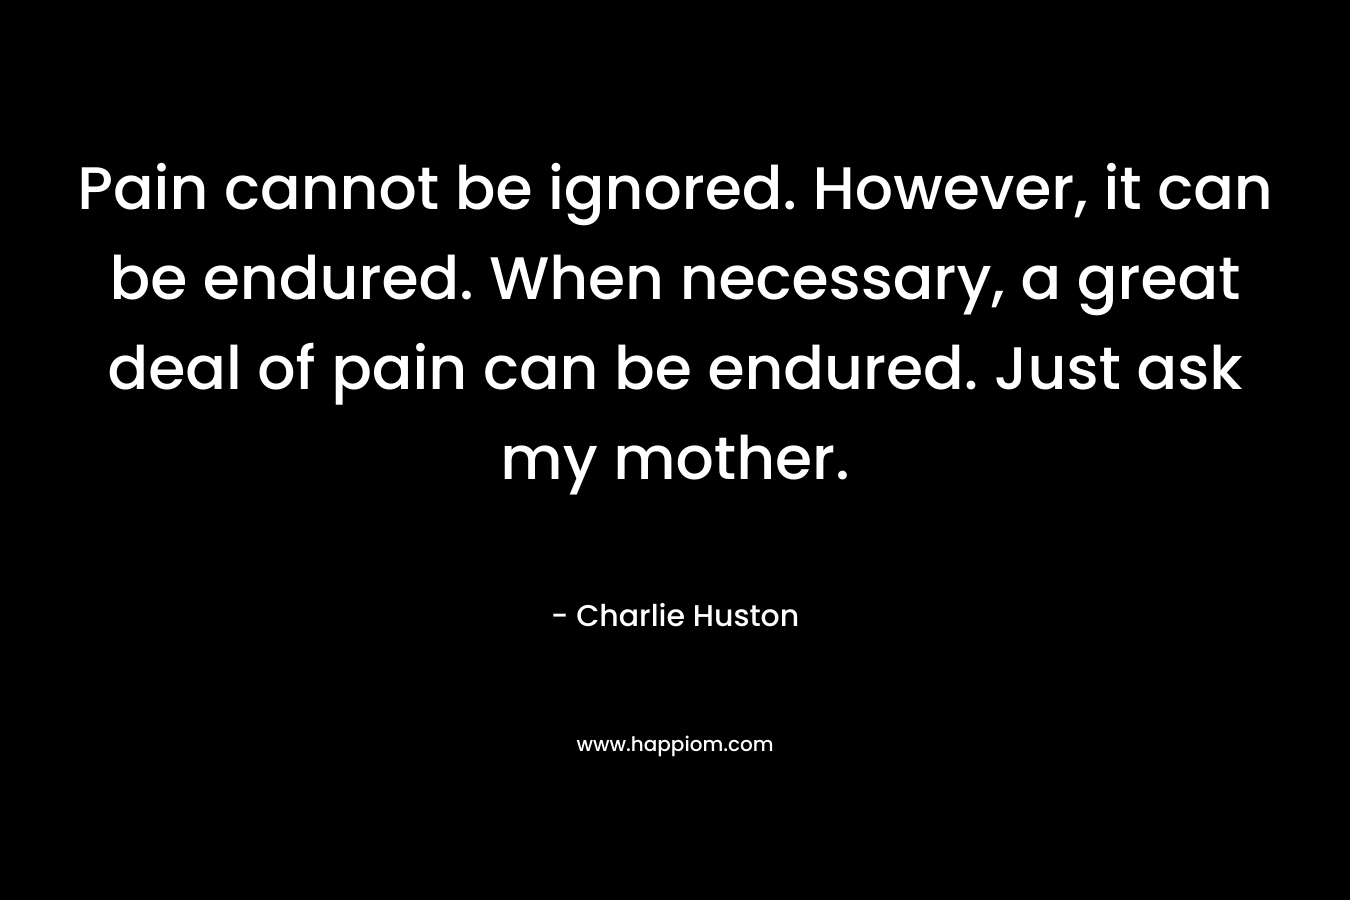 Pain cannot be ignored. However, it can be endured. When necessary, a great deal of pain can be endured. Just ask my mother.